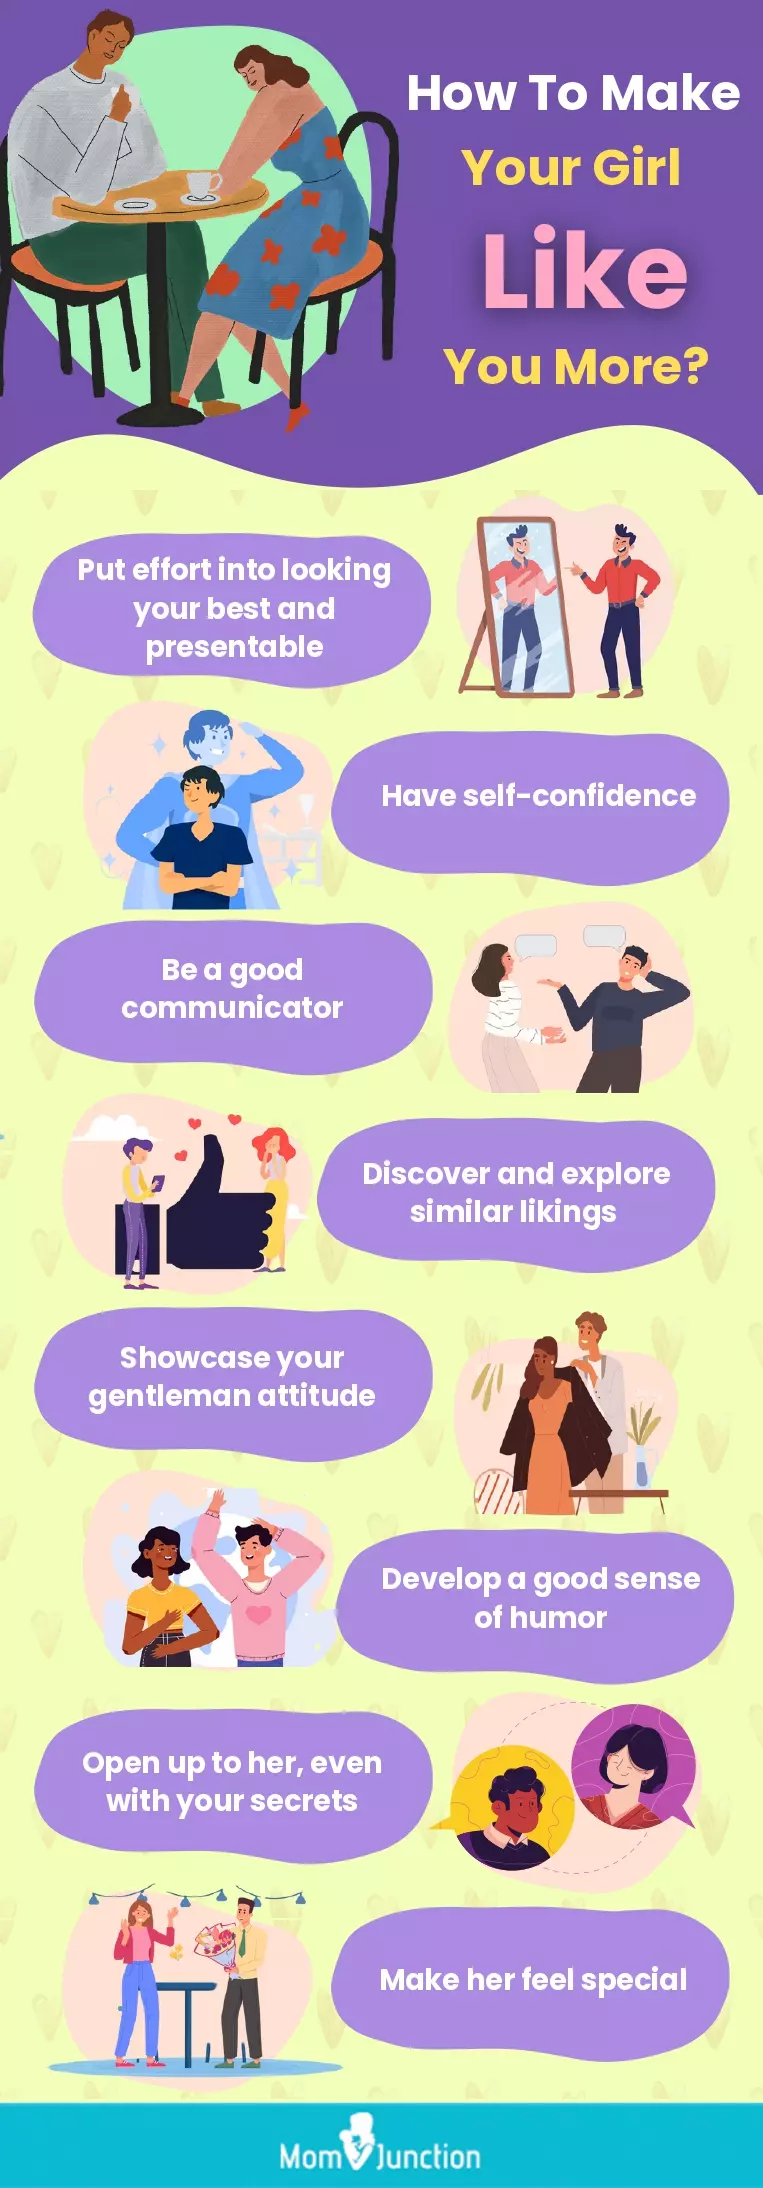 how to make your girl like you more (infographic)